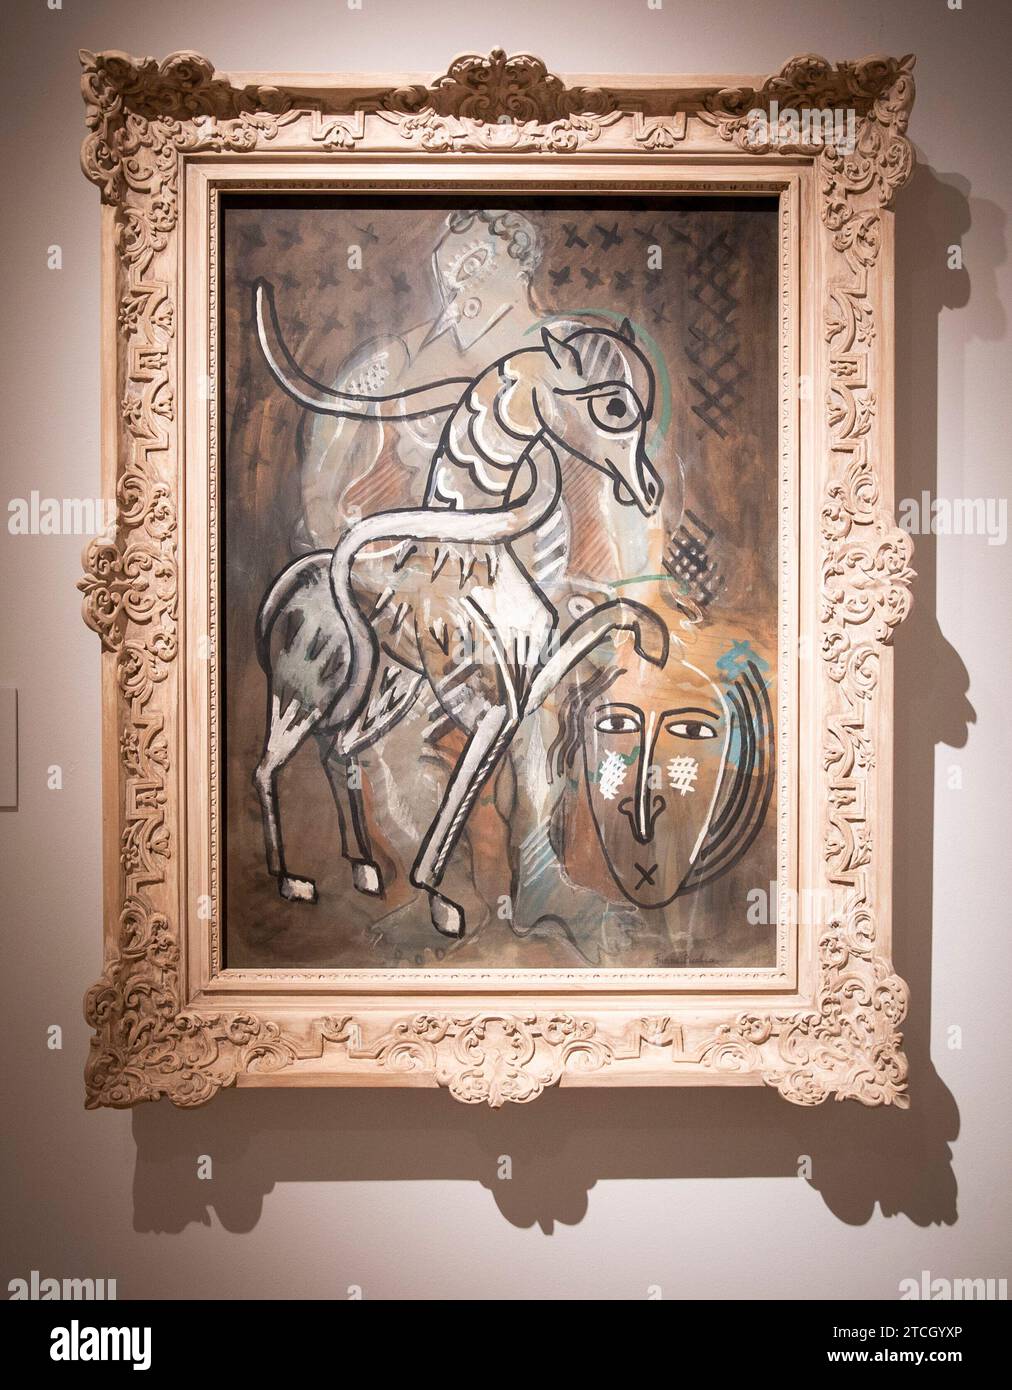 Madrid, 02/08/2022. Arrival of the painting by Paul Gauguin (1892) from Andorra to the Thyssen-Bornemisza Museum. In the image, 'Series transparencies', 1925-1927, by Francis Picabia. Photo: Ignacio Gil. ARCHDC. Credit: Album / Archivo ABC / Ignacio Gil Stock Photo